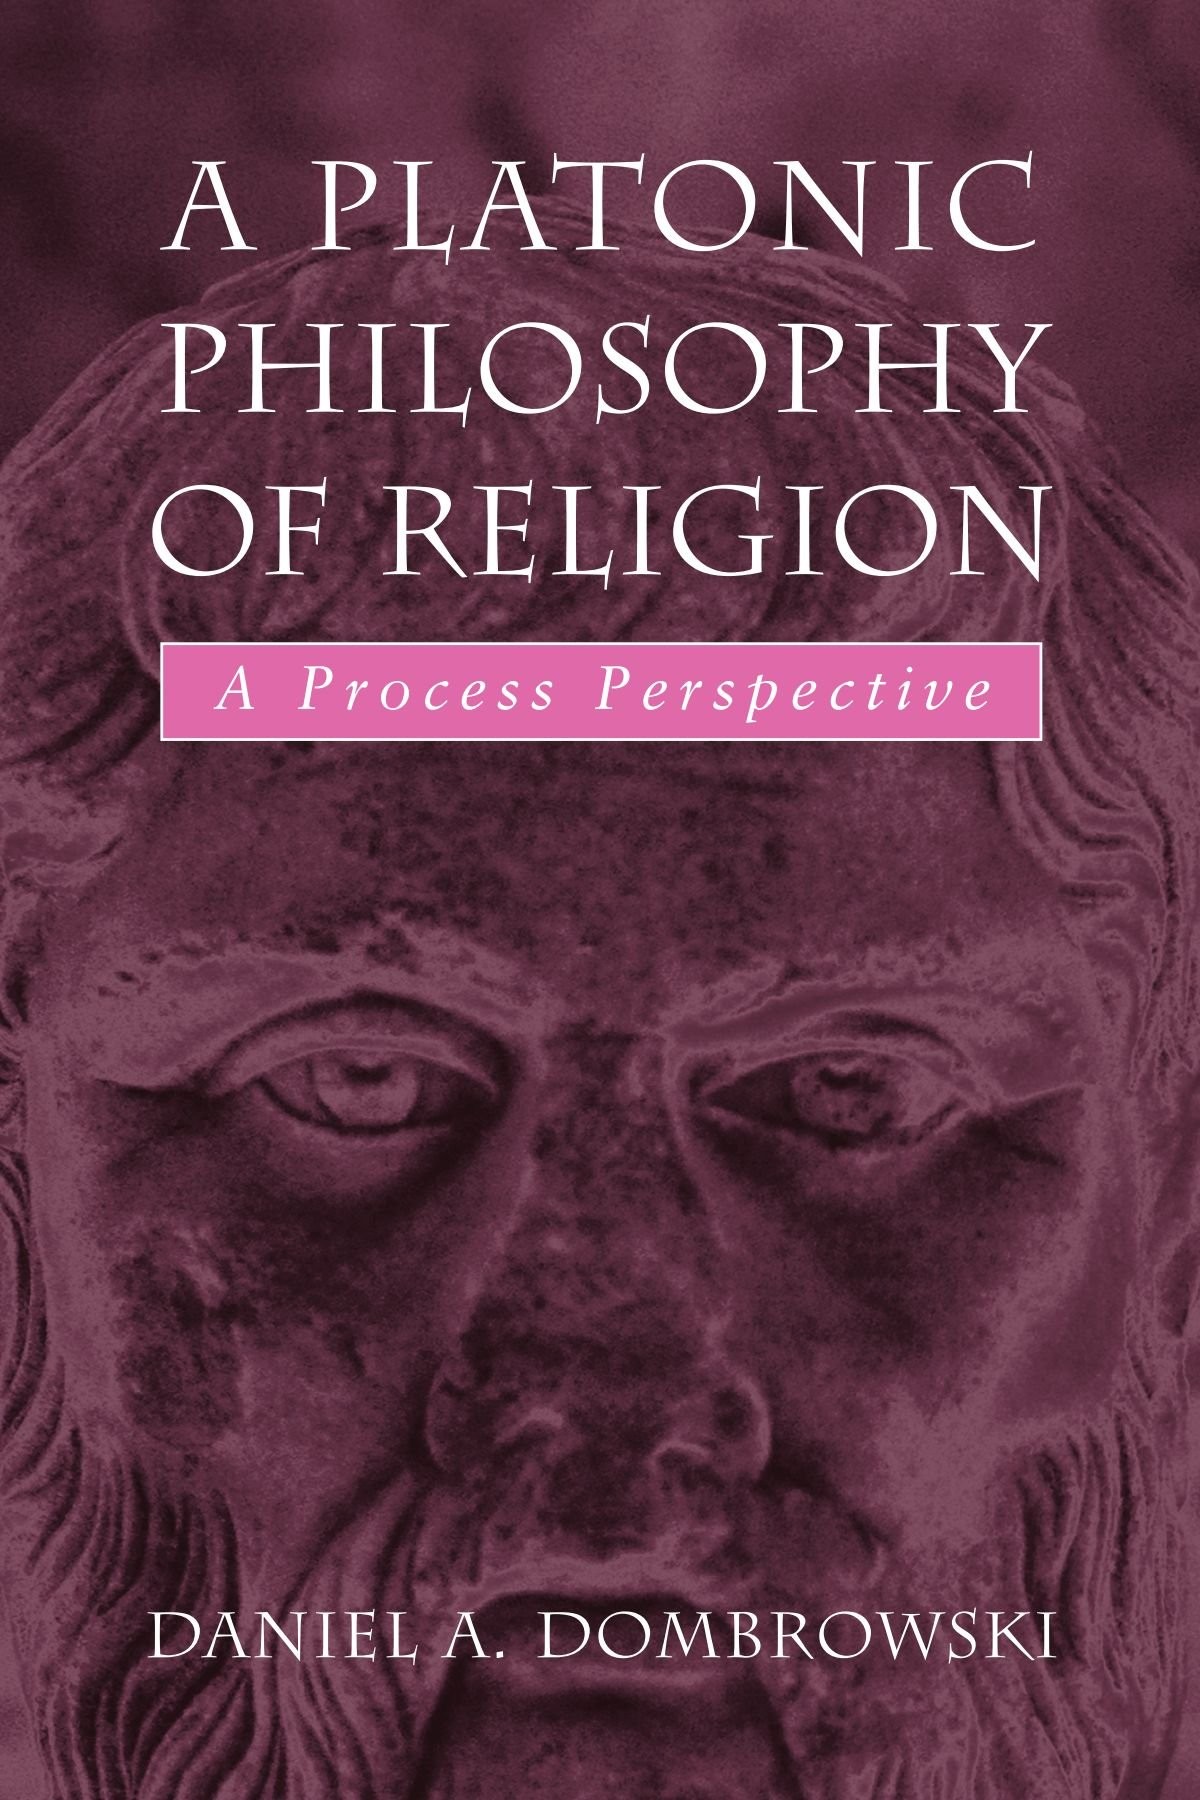 Platonic Philosophy of Religion, A: A Process Perspective